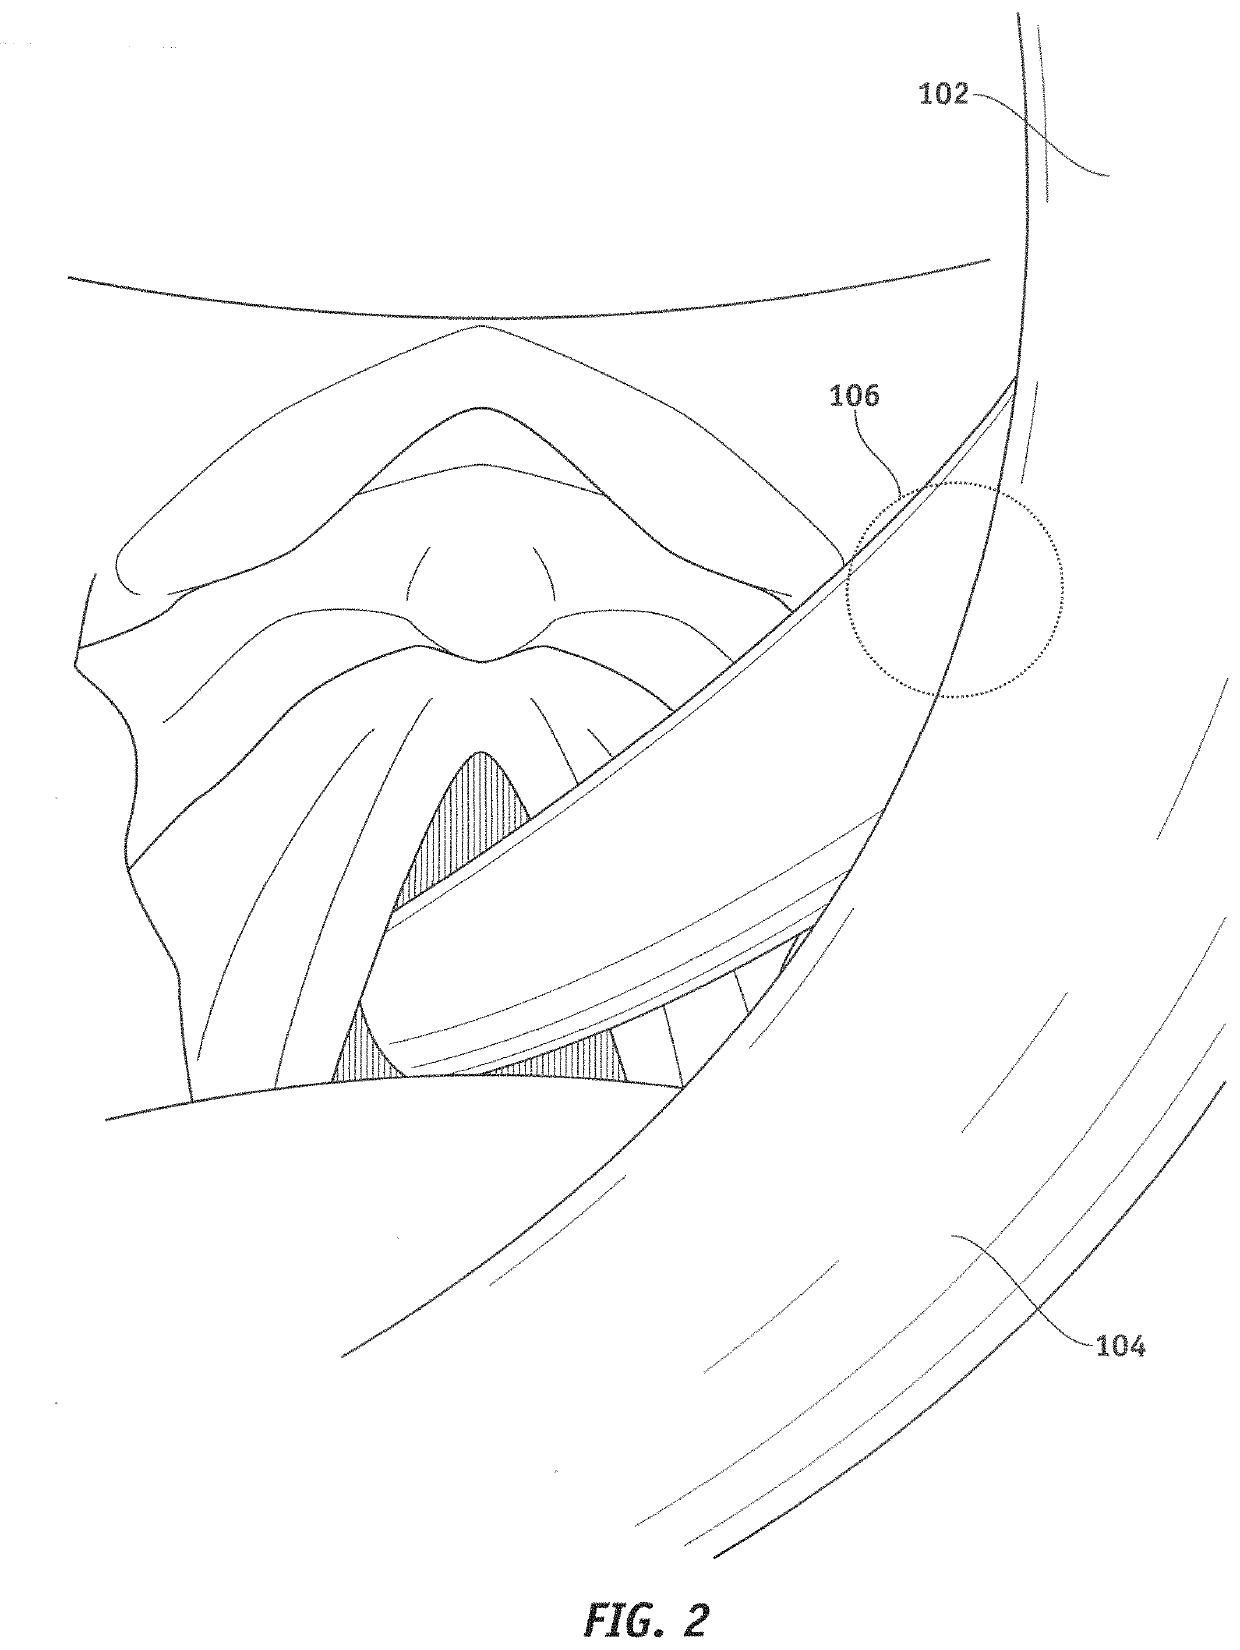 Apparatus for enabling blind endotracheal tube or guide wire insertion into the trachea